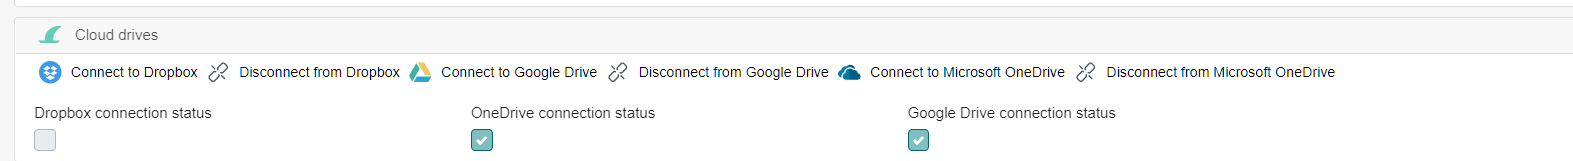 Trados Studio Cloud drives connection status showing Google Drive connected with a green checkmark.